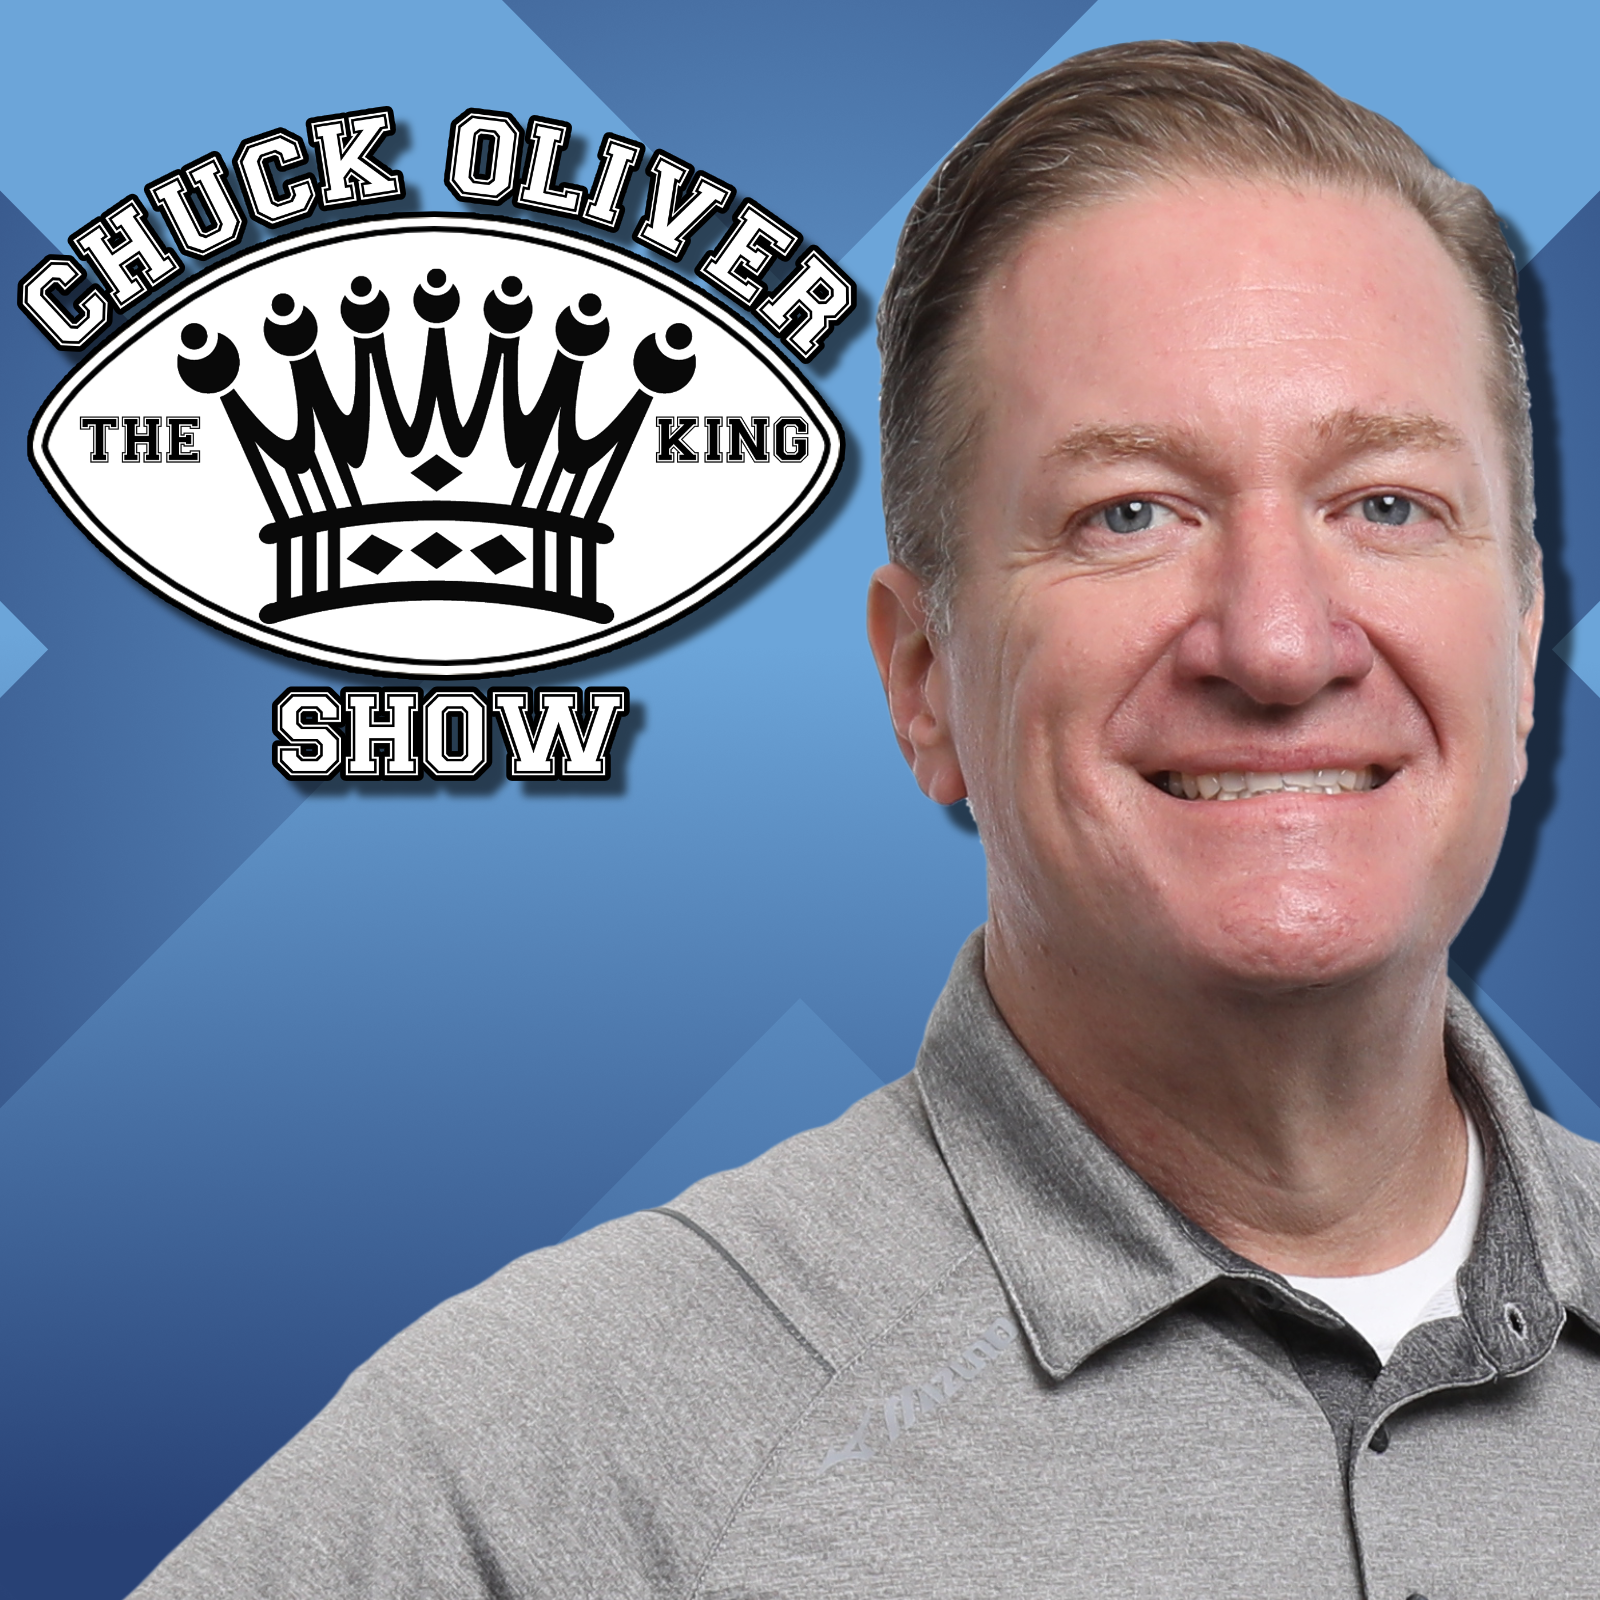 CHUCK OLIVER SHOW 12-9 FRIDAY HOUR 2